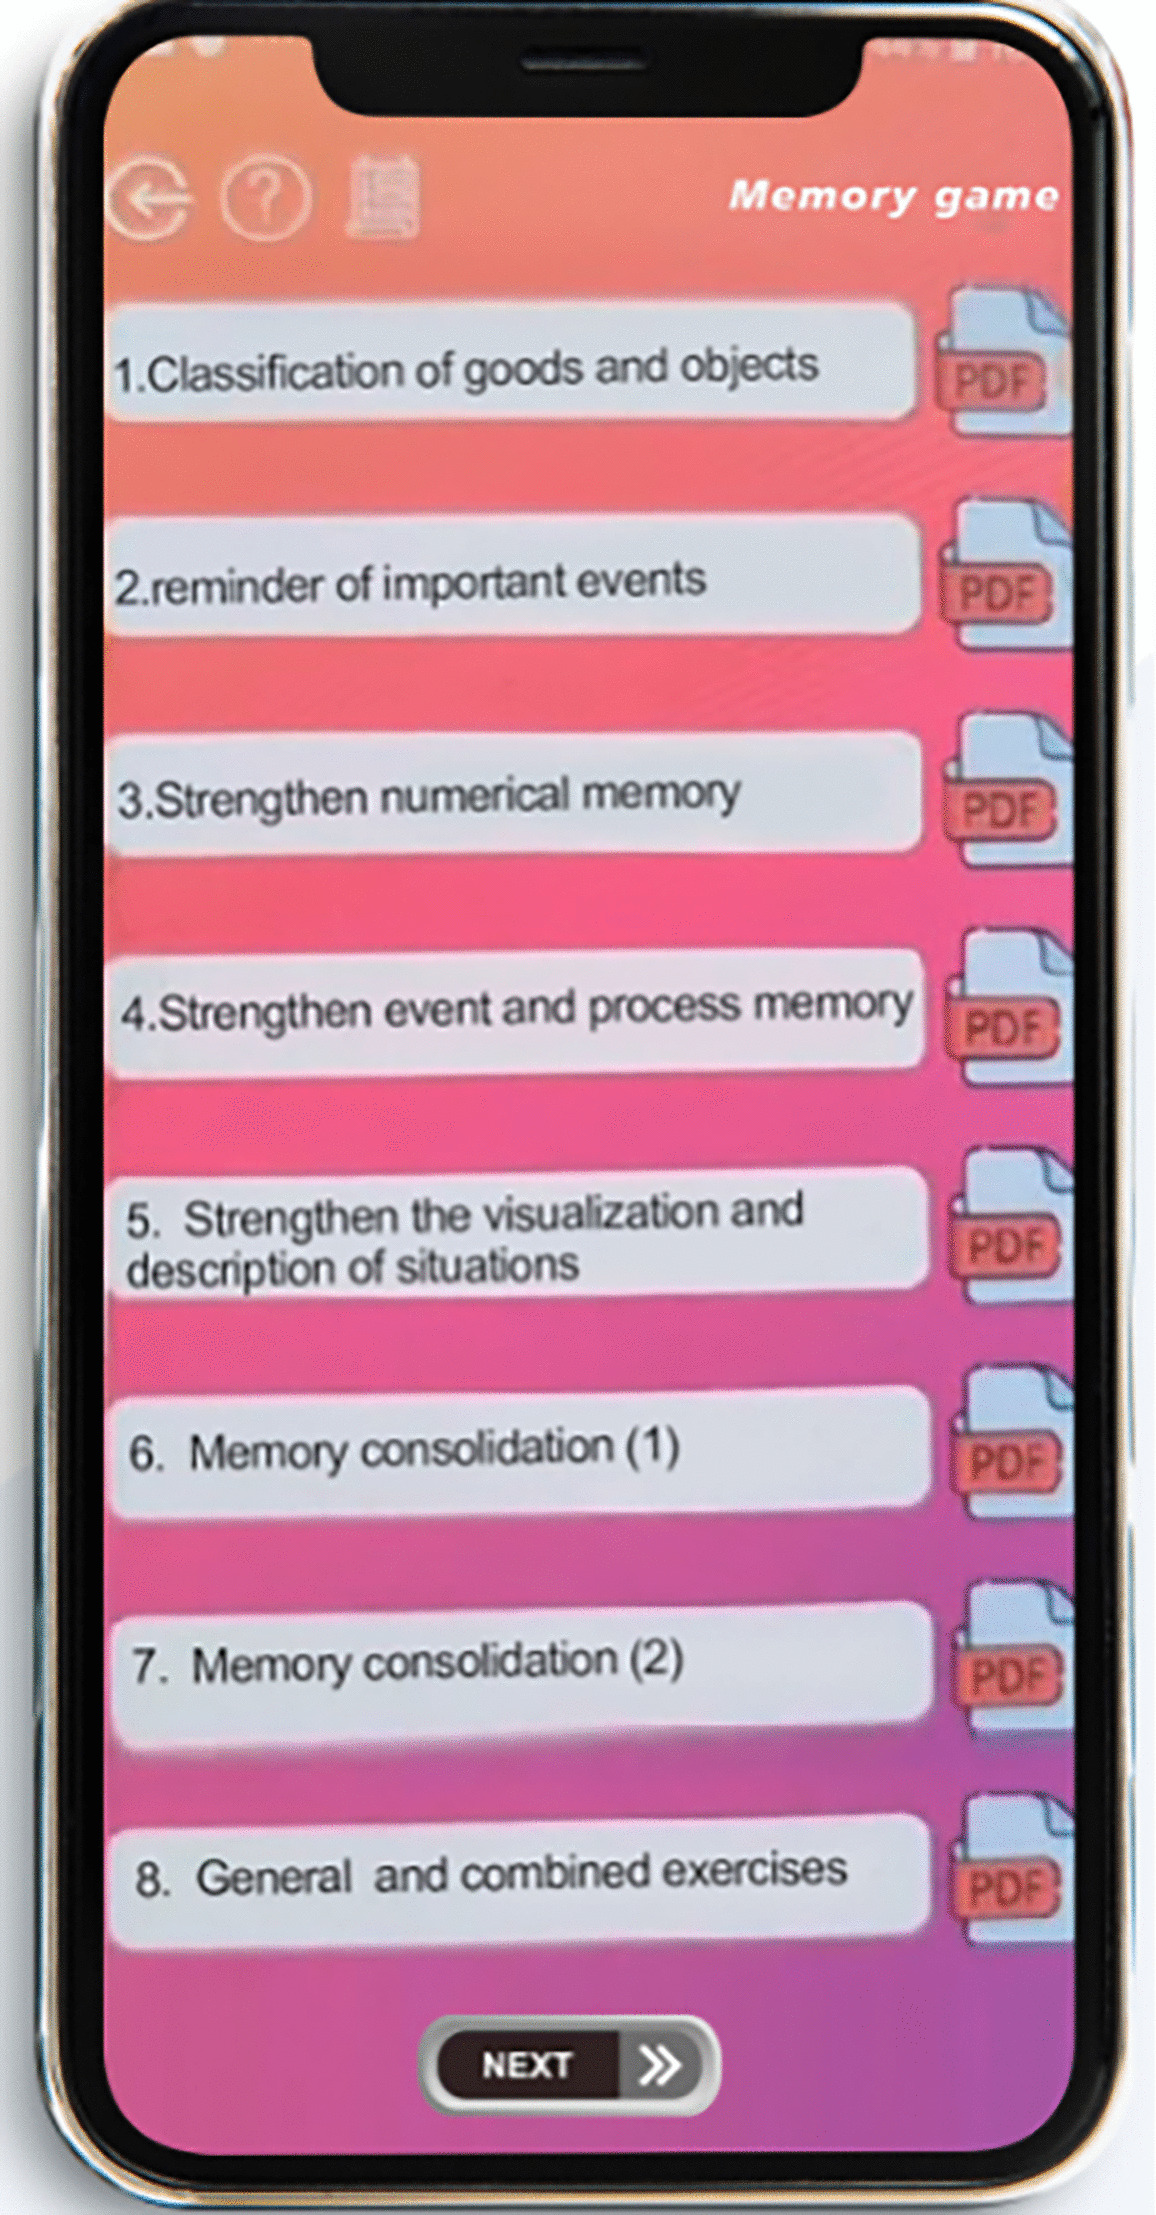 Memory Rehabilitation in Aging as a Need for Today’s Modern Societies: Designing and Determining the Effects of Memory-Boosting Mobile Application on the Cognitive Function of Aging with Cognitive Dysfunction